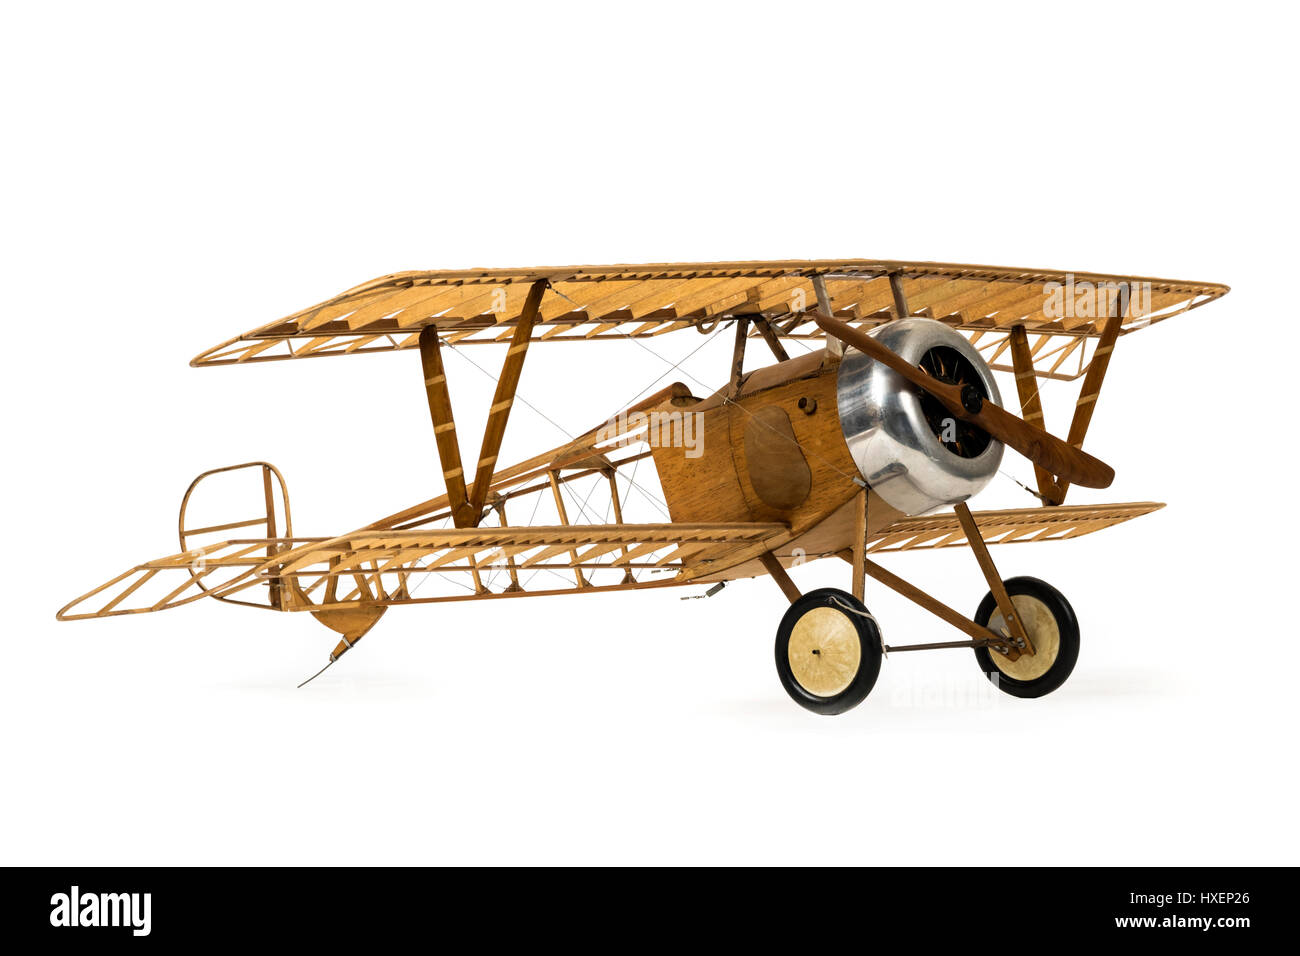 Vintage 1:6 scale skeletal model of a WW1 RFC (Royal Flying Corps) fighter aircraft, complete with Williams Bros. Le Rhone engine. Stock Photo